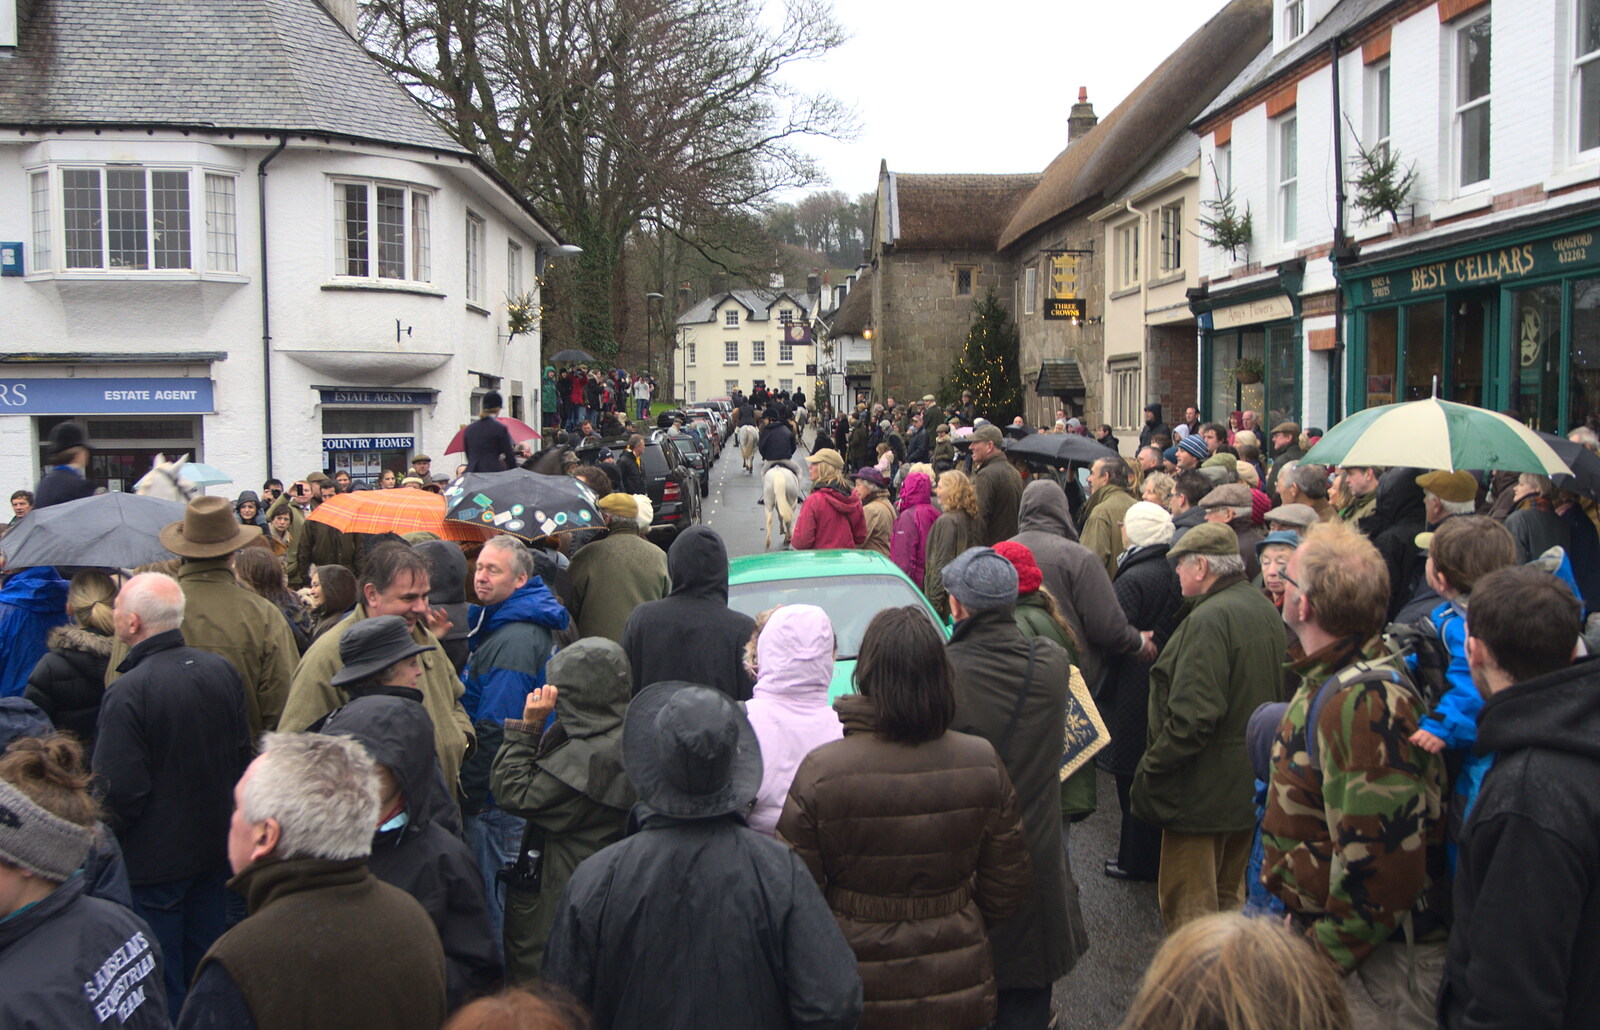 The car is swalled by people from The Boxing Day Hunt, Chagford, Devon - 26th December 2012